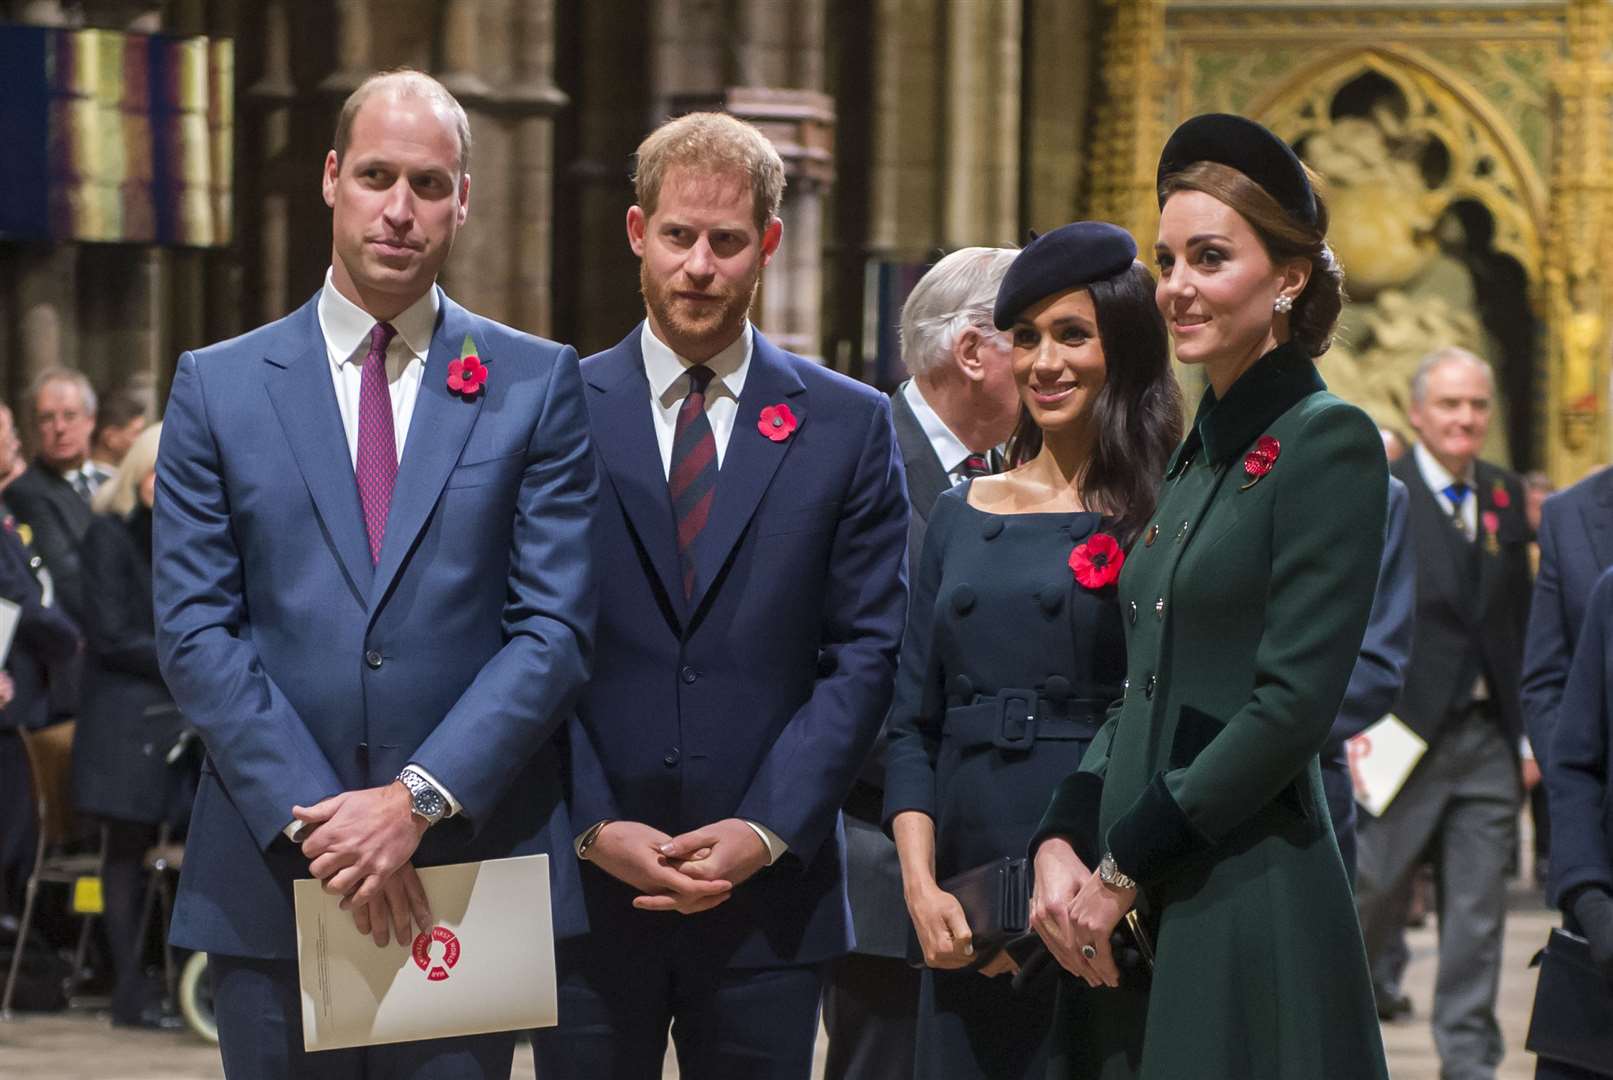 The then Duke and Duchess of Cambridge (now the Prince and Princess of Wales) and the Duke and Duchess of Sussex in 2018 (Paul Grover/Daily Telegraph/PA)